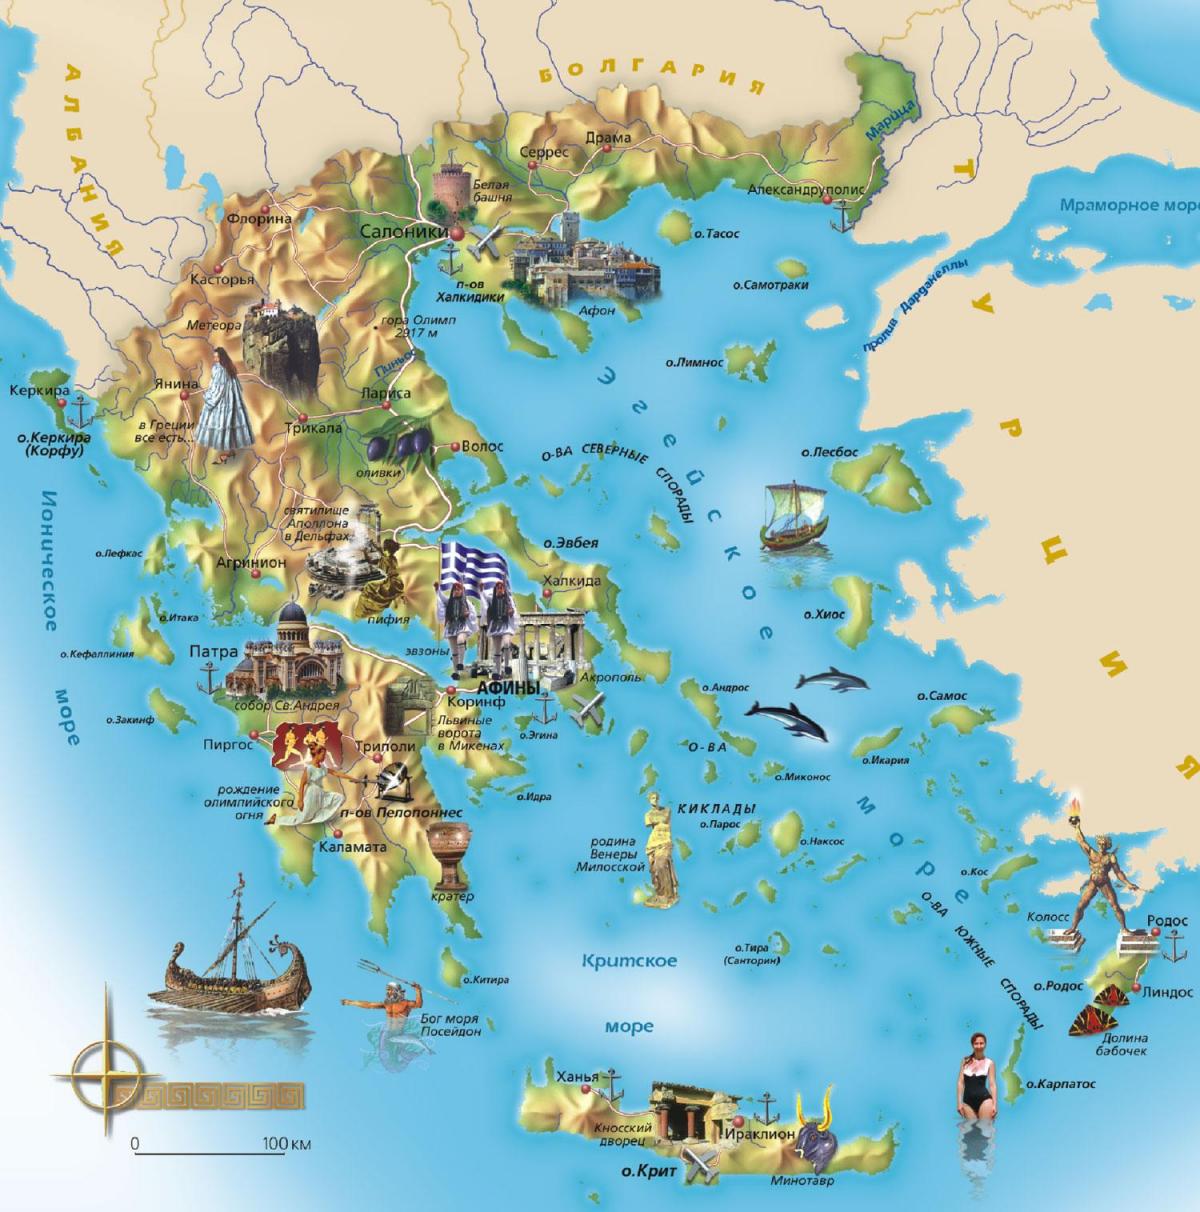 Greece tourist attractions map